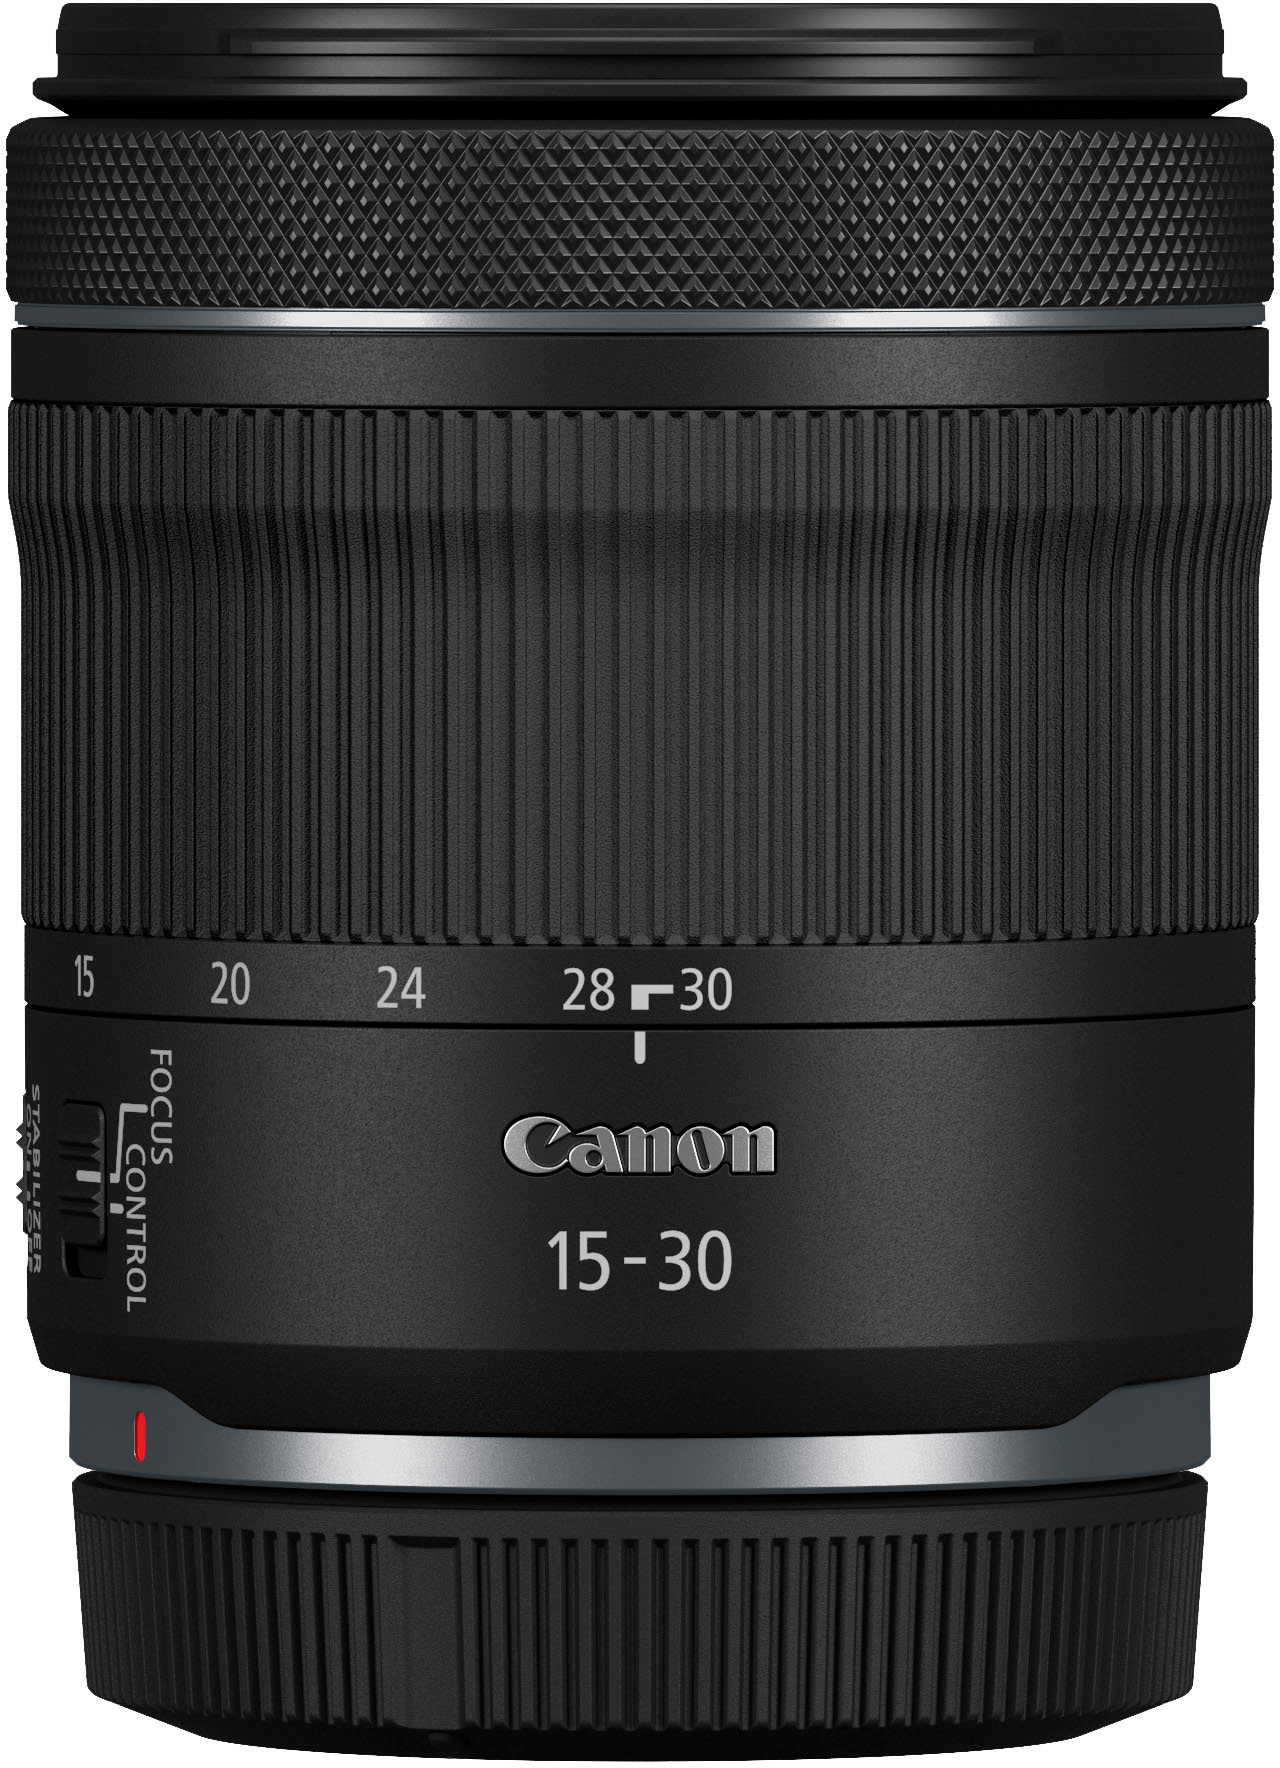 Angle View: Canon - RF 15-30mm f/4.5-6.3 IS STM Ultra-Wide Angle Zoom Lens - Black